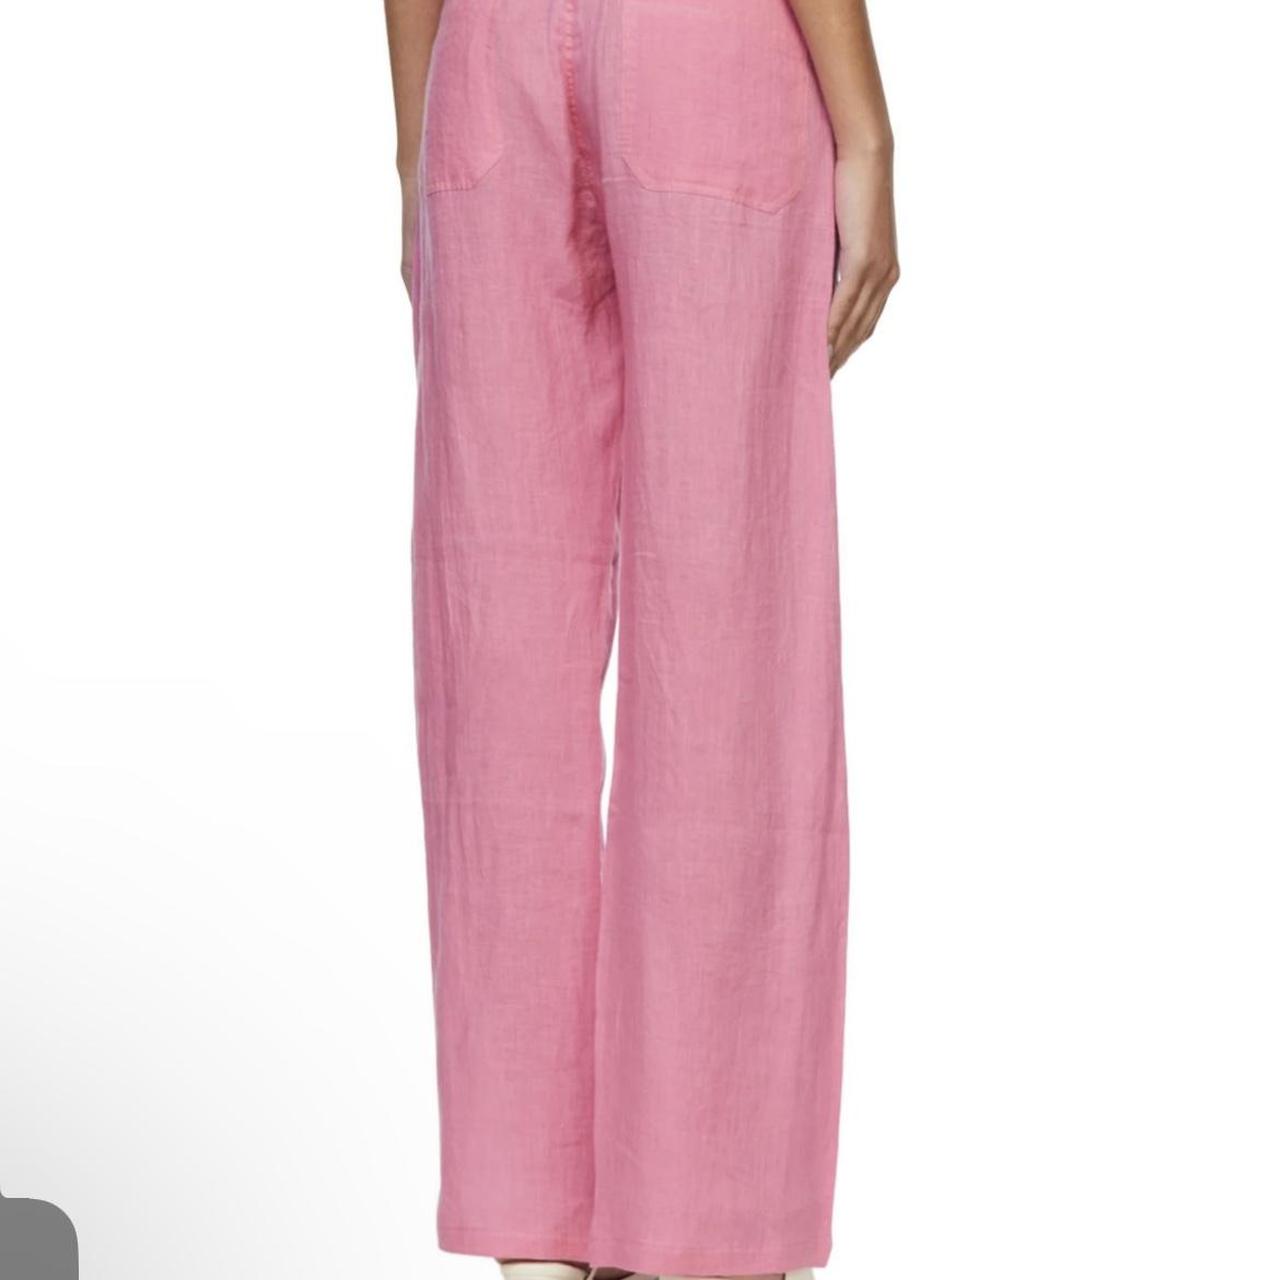 Gimaguas Pink Linen Valley Trousers, new with tags!... - Depop